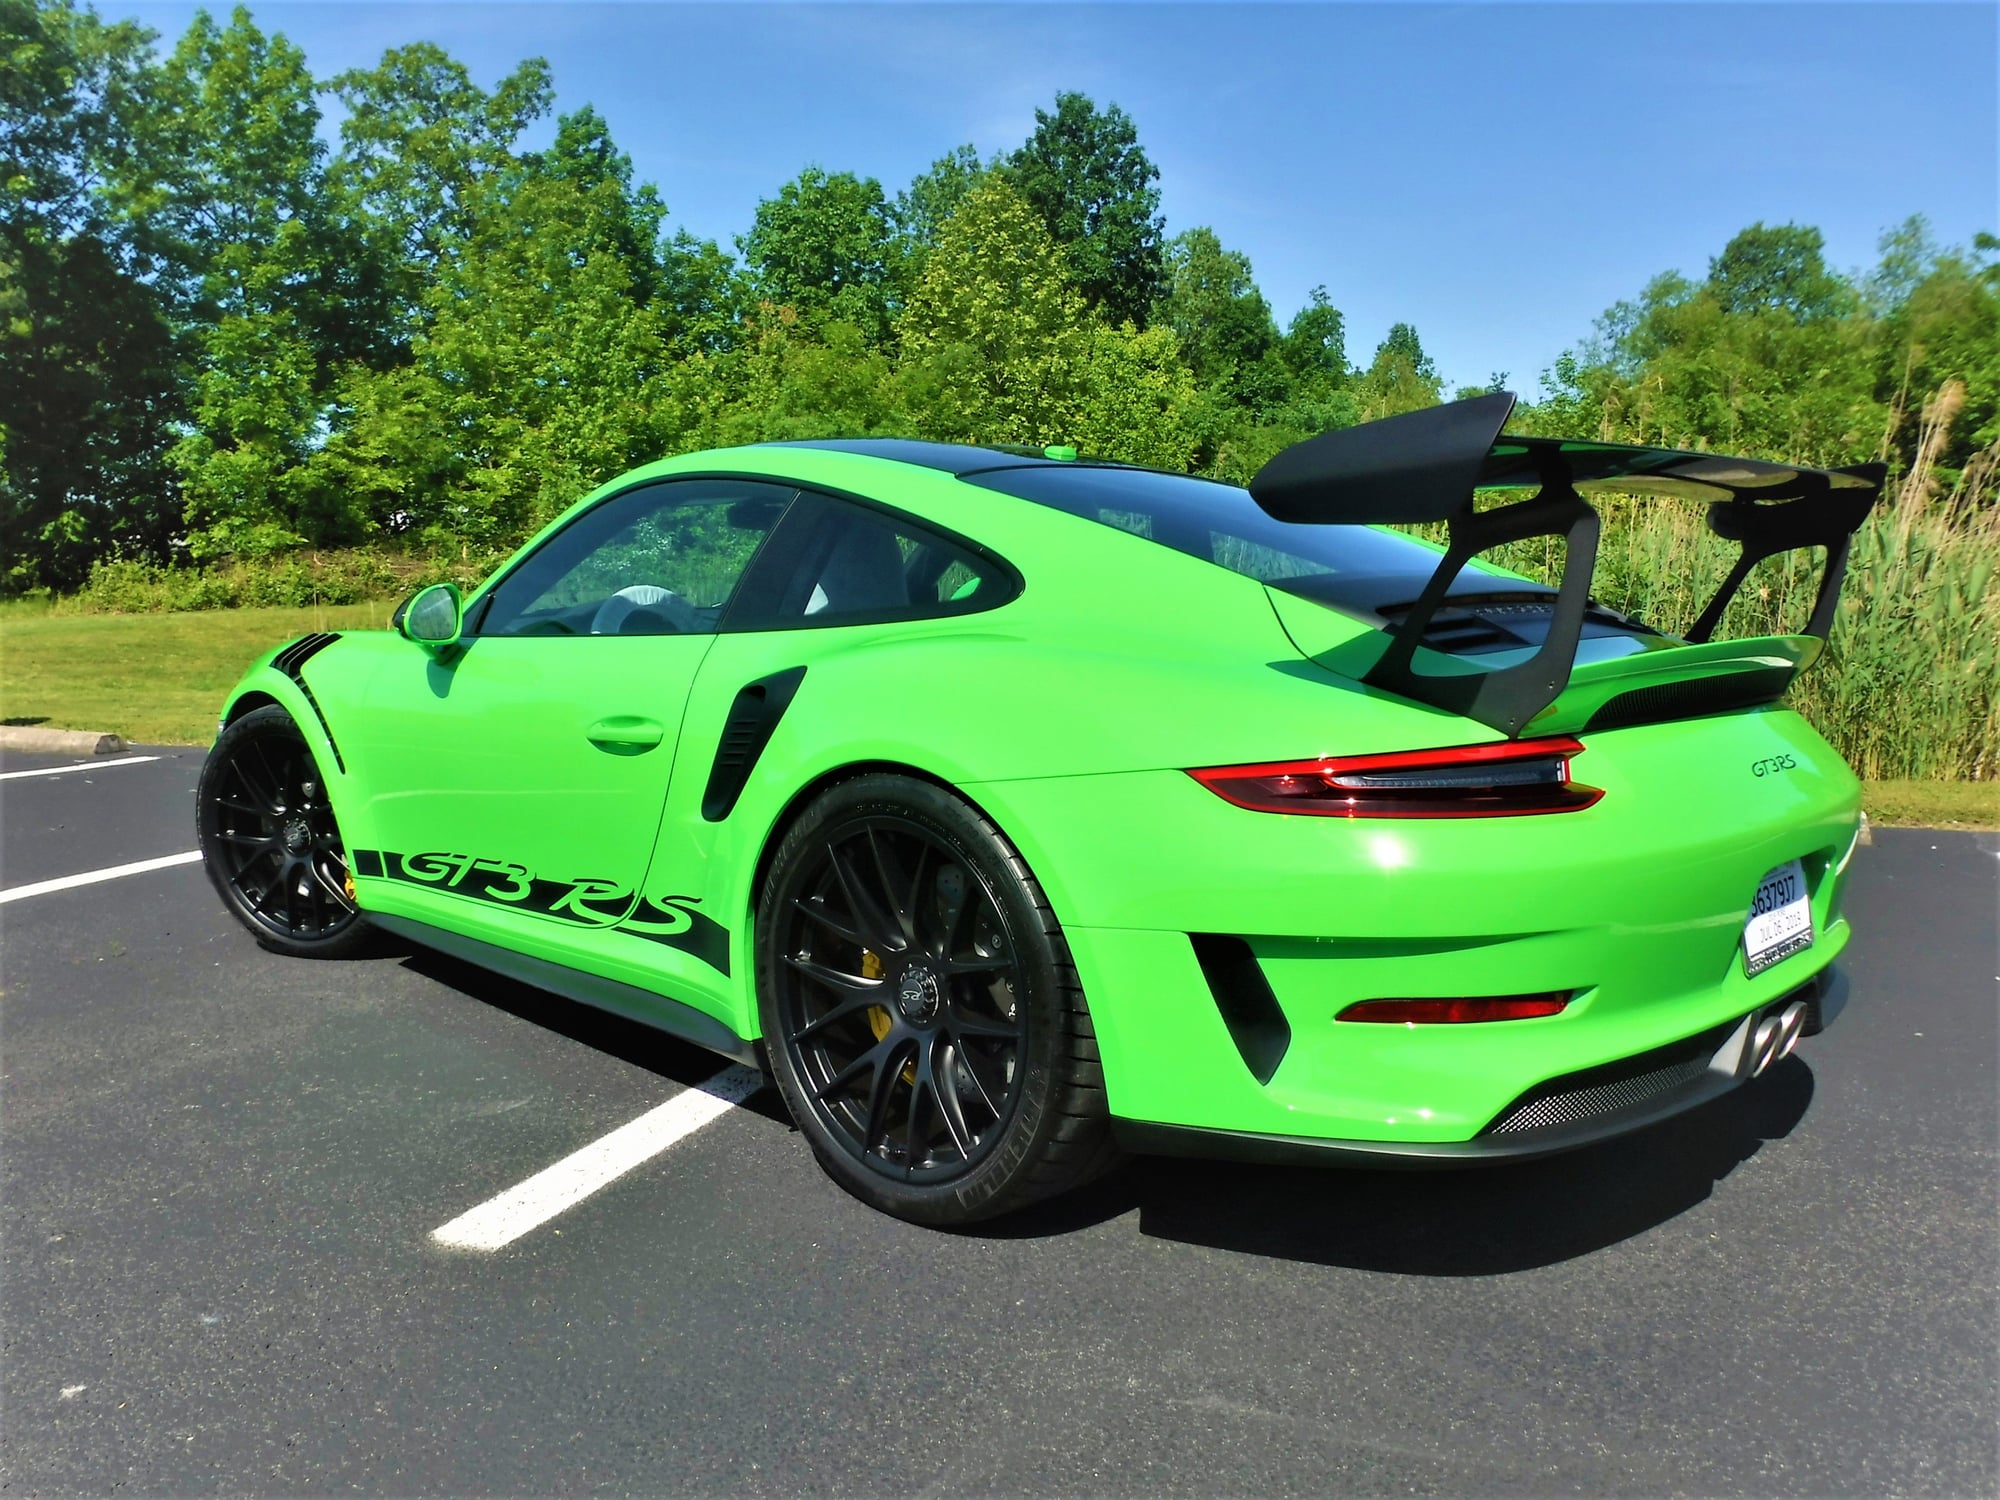 2019 Porsche GT3 - 2019 GT3 RS with Weissach and Magnesium wheels - Used - VIN WP0AF2A95KS165786 - 11 Miles - Paducah, KY 42003, United States